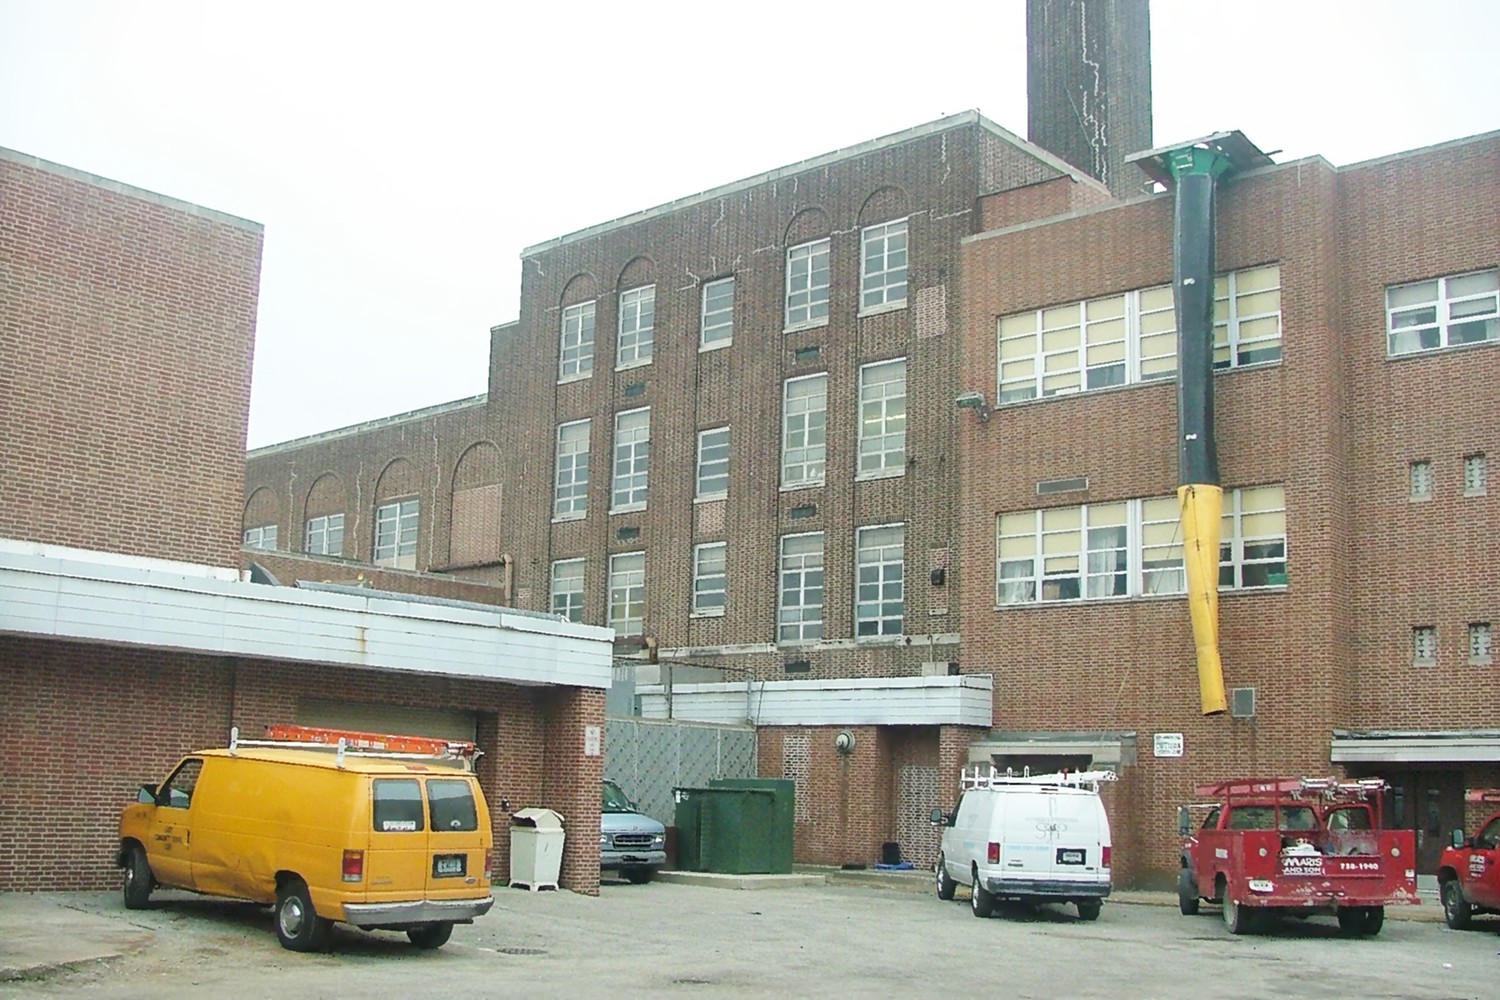 Theodore Roosevelt High School, Gary Indiana North elevation, 1930 section(center), 1968 addition at right. Camera facing southeast (2010)